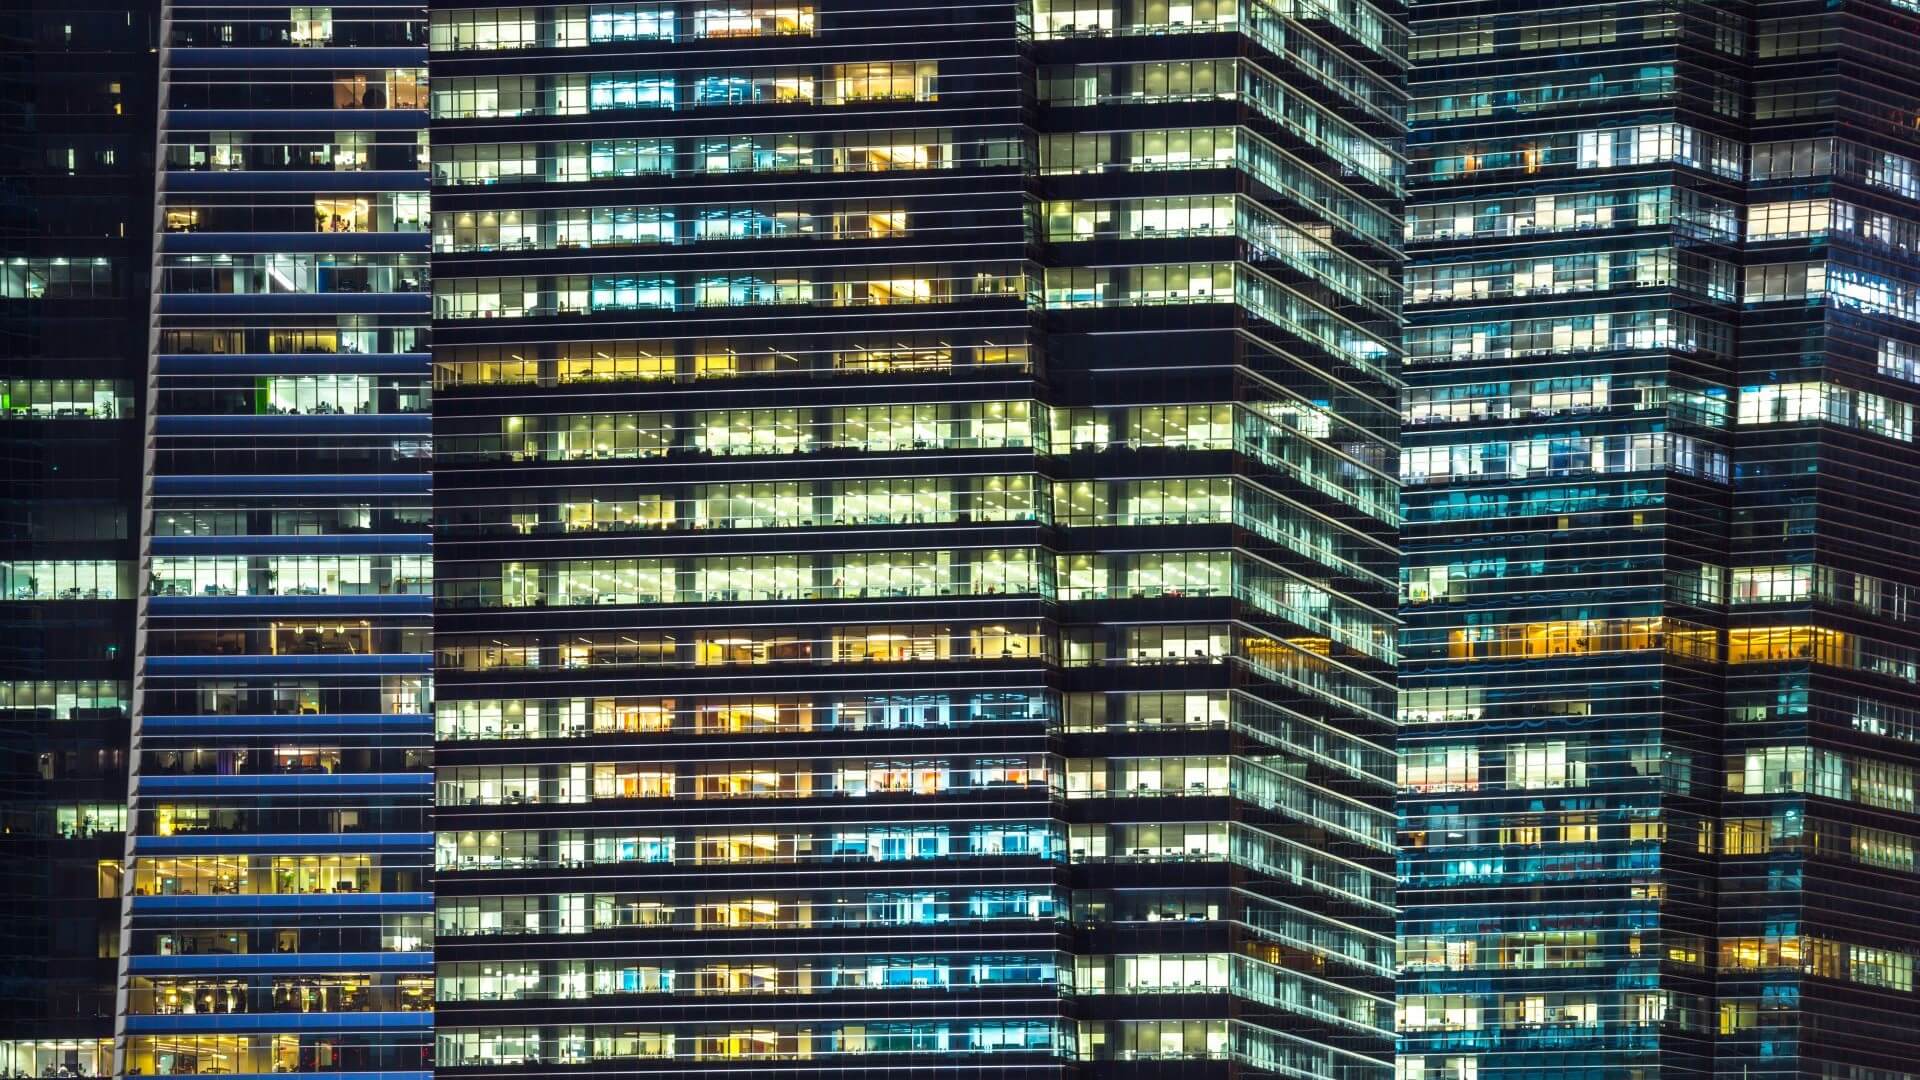 Office blocks with lights on at night